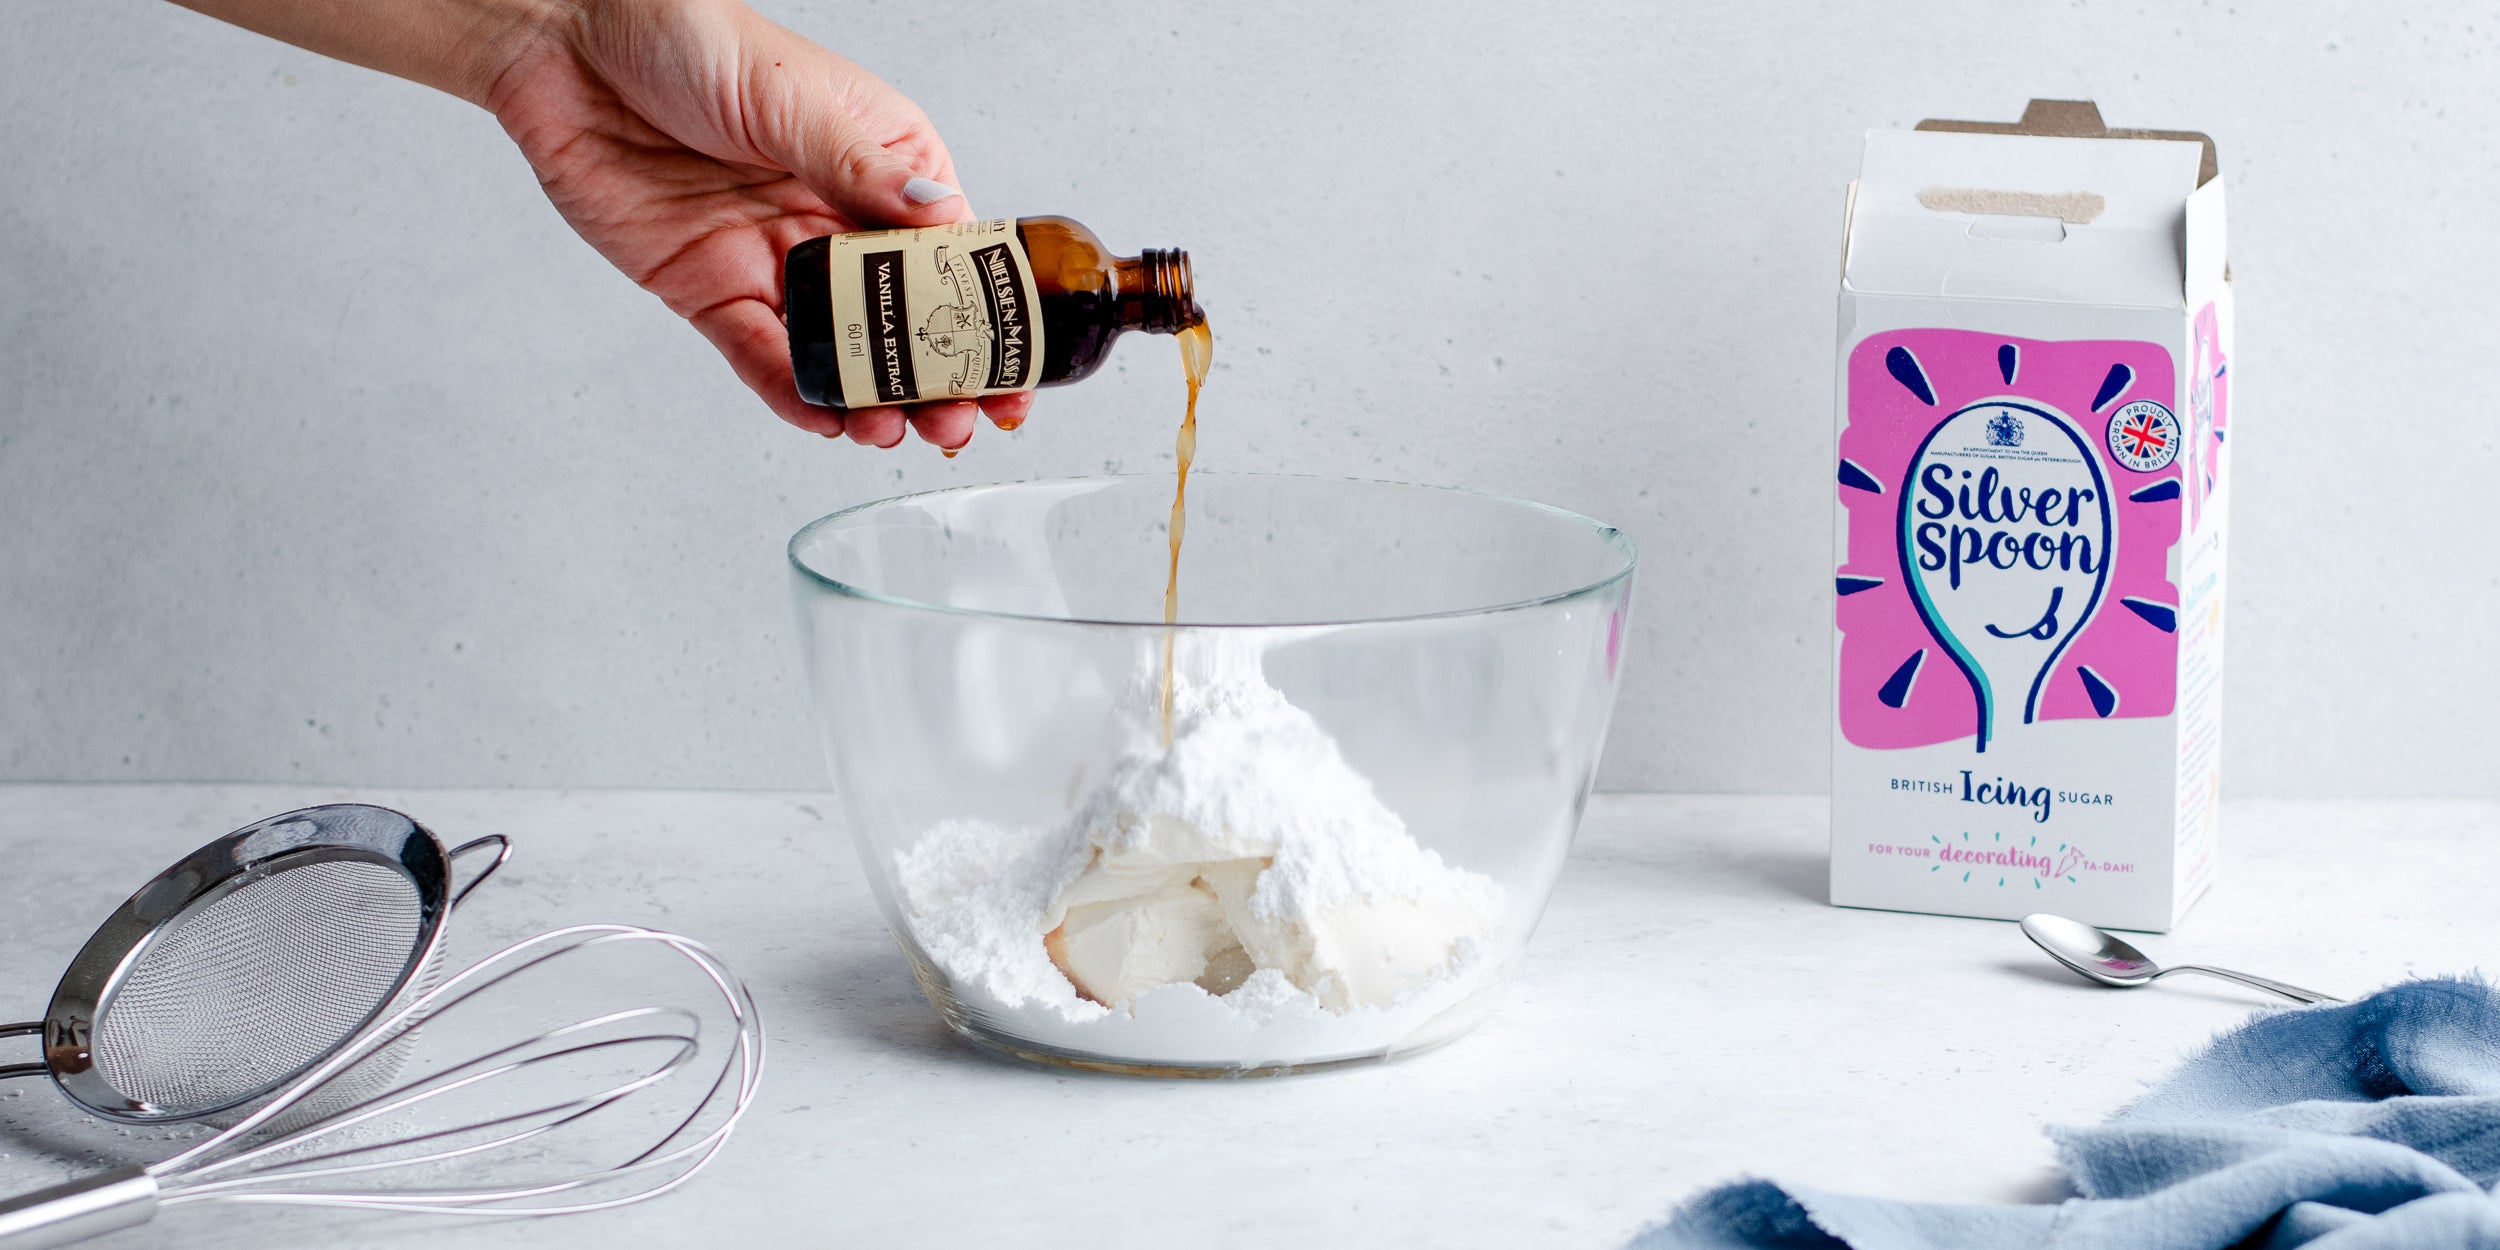 Vanilla extract being poured into icing sugar to make a cheesecake mixture for a no-bake Oreo cheesecake